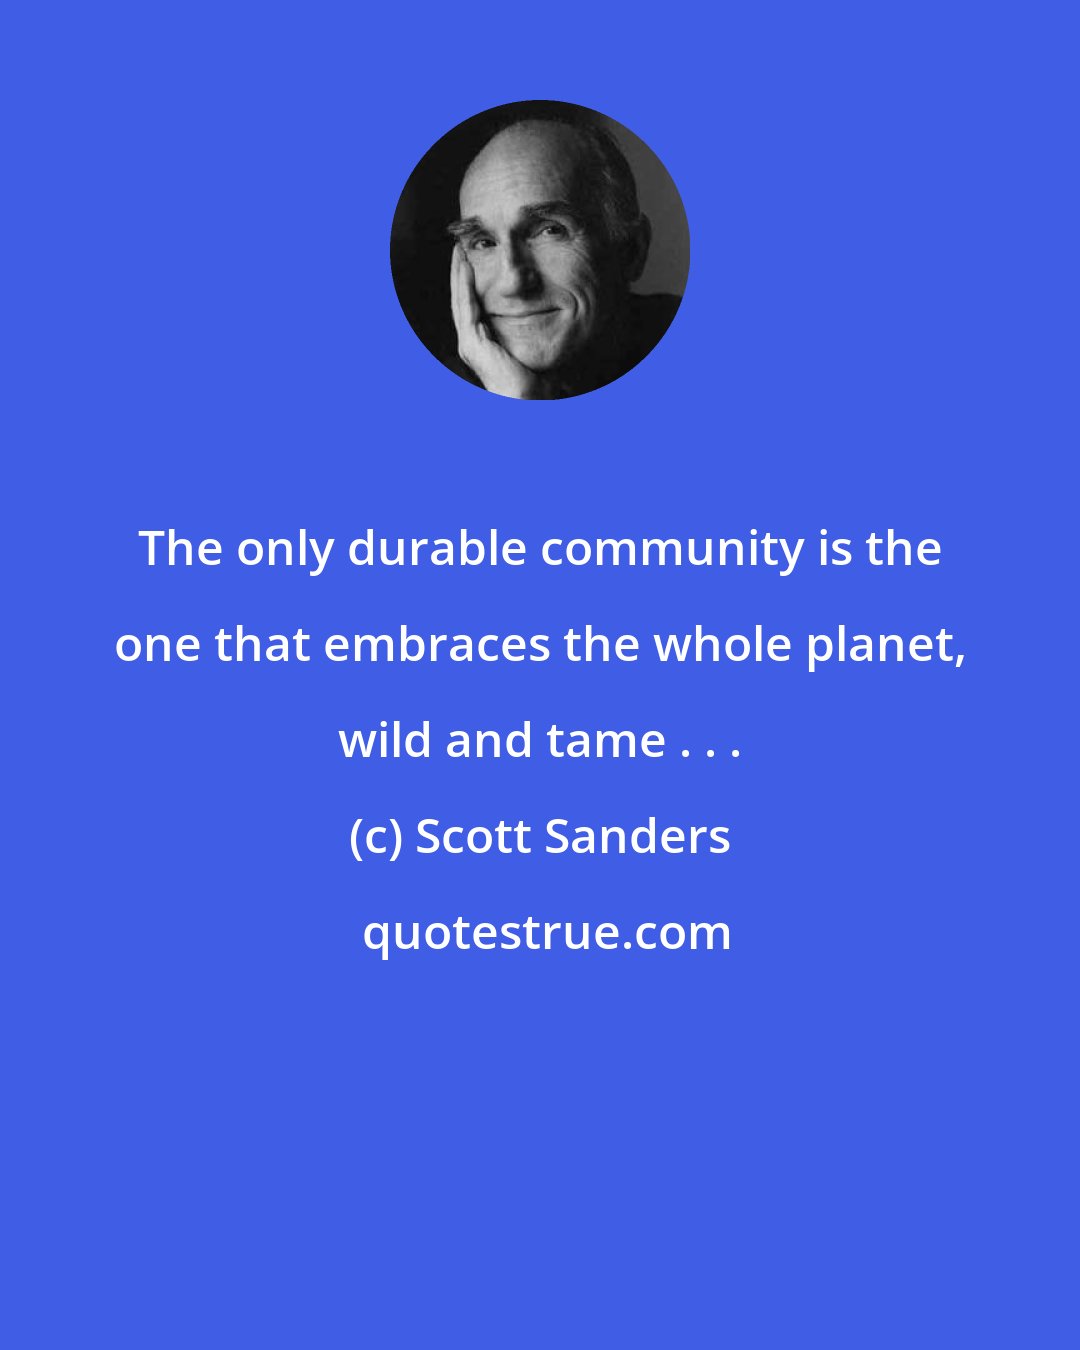 Scott Sanders: The only durable community is the one that embraces the whole planet, wild and tame . . .